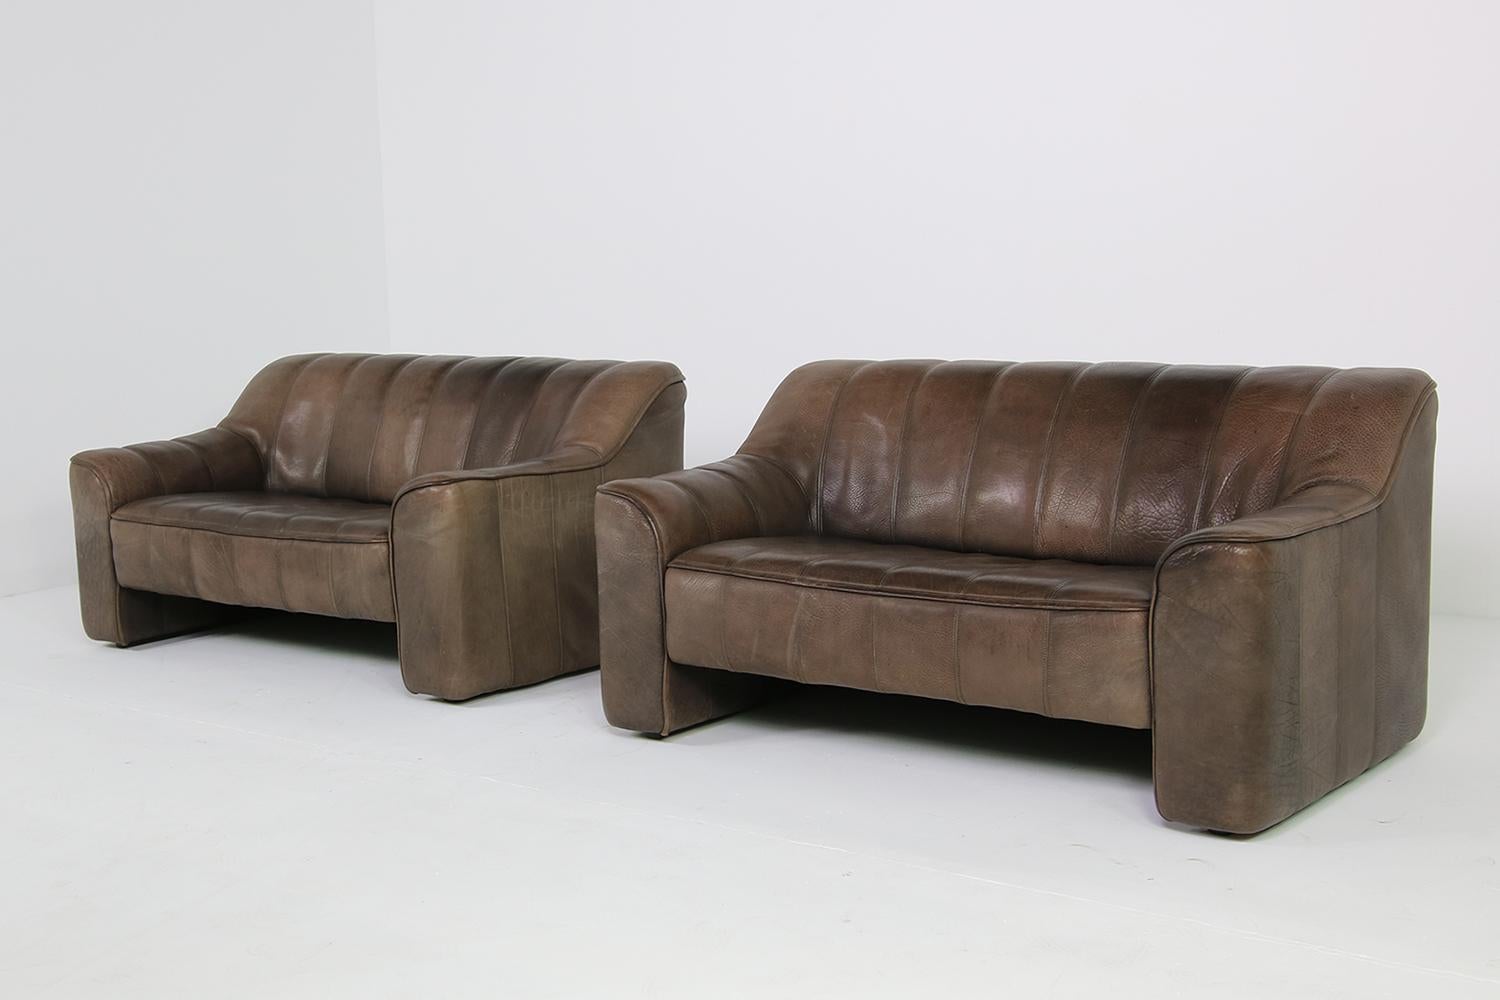 Swiss Pair of 1970s Vintage De Sede DS 44 Two-Seat Buffalo Leather Sofas, Brown